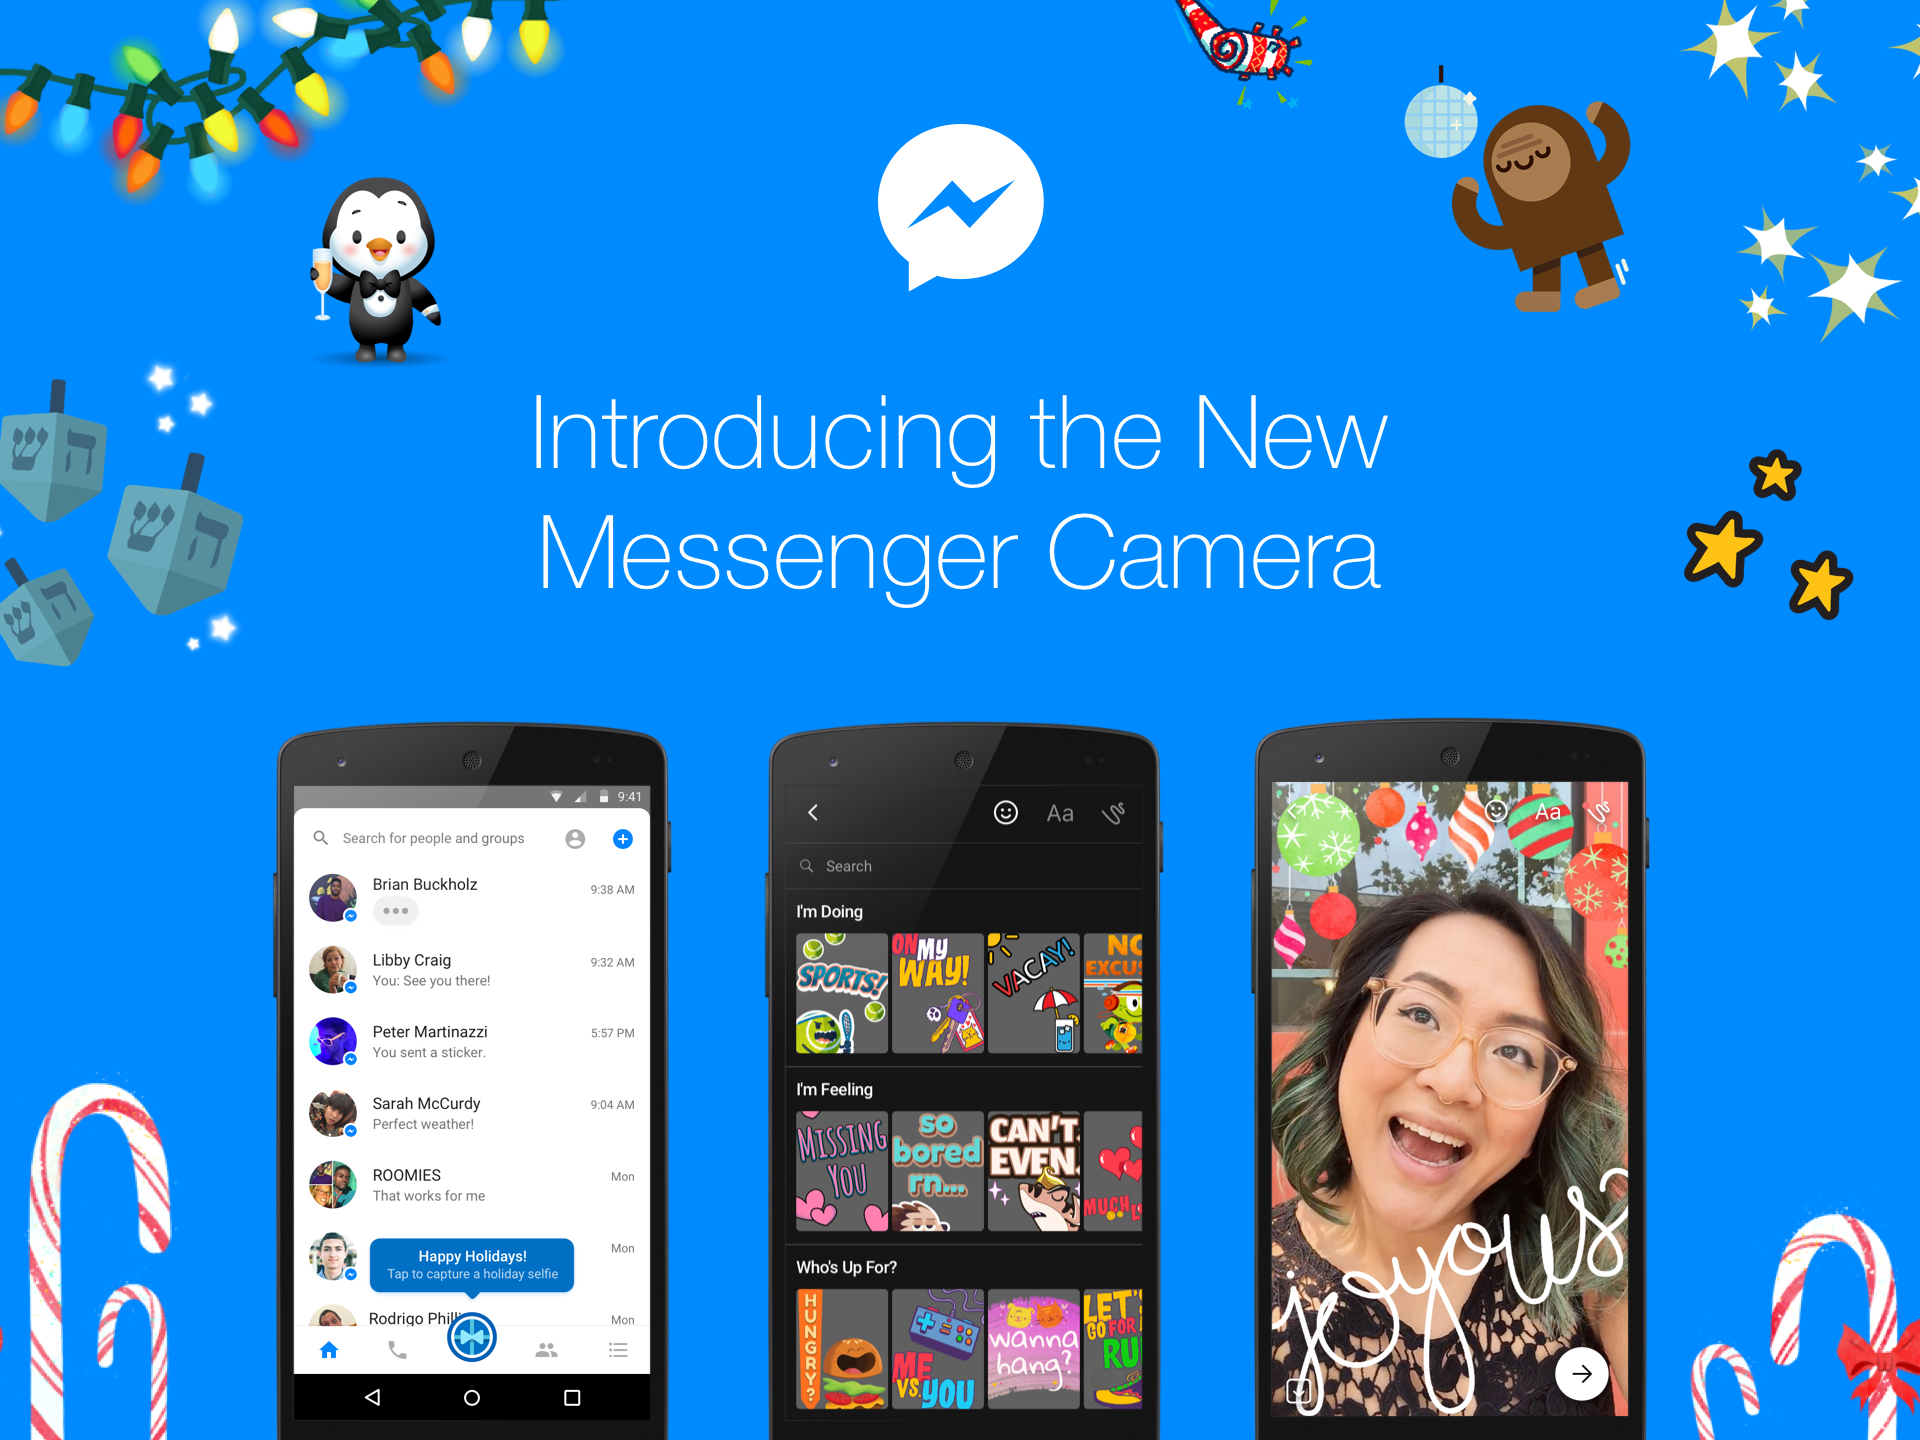 Facebook updates their messenger app with new features and a new camera 1